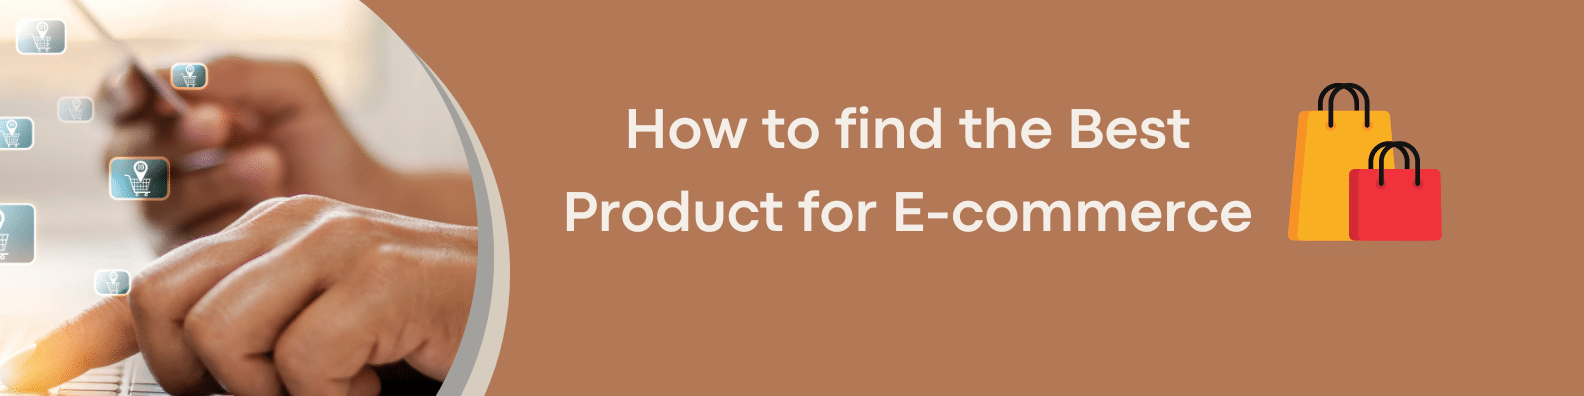 How to find the Best Product for E-commerce